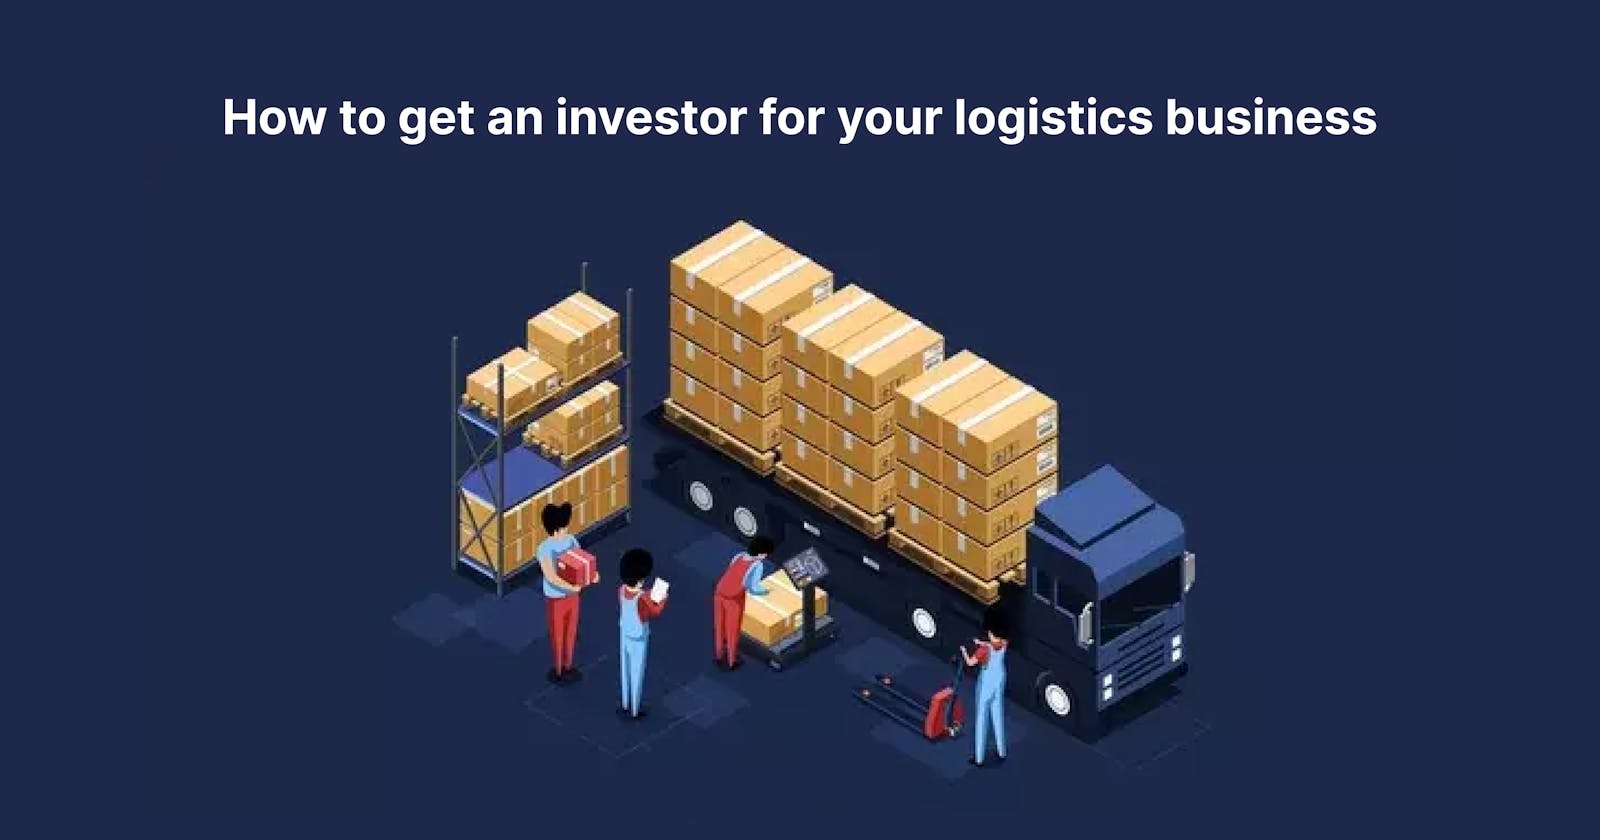 How to get an investor for your logistics business